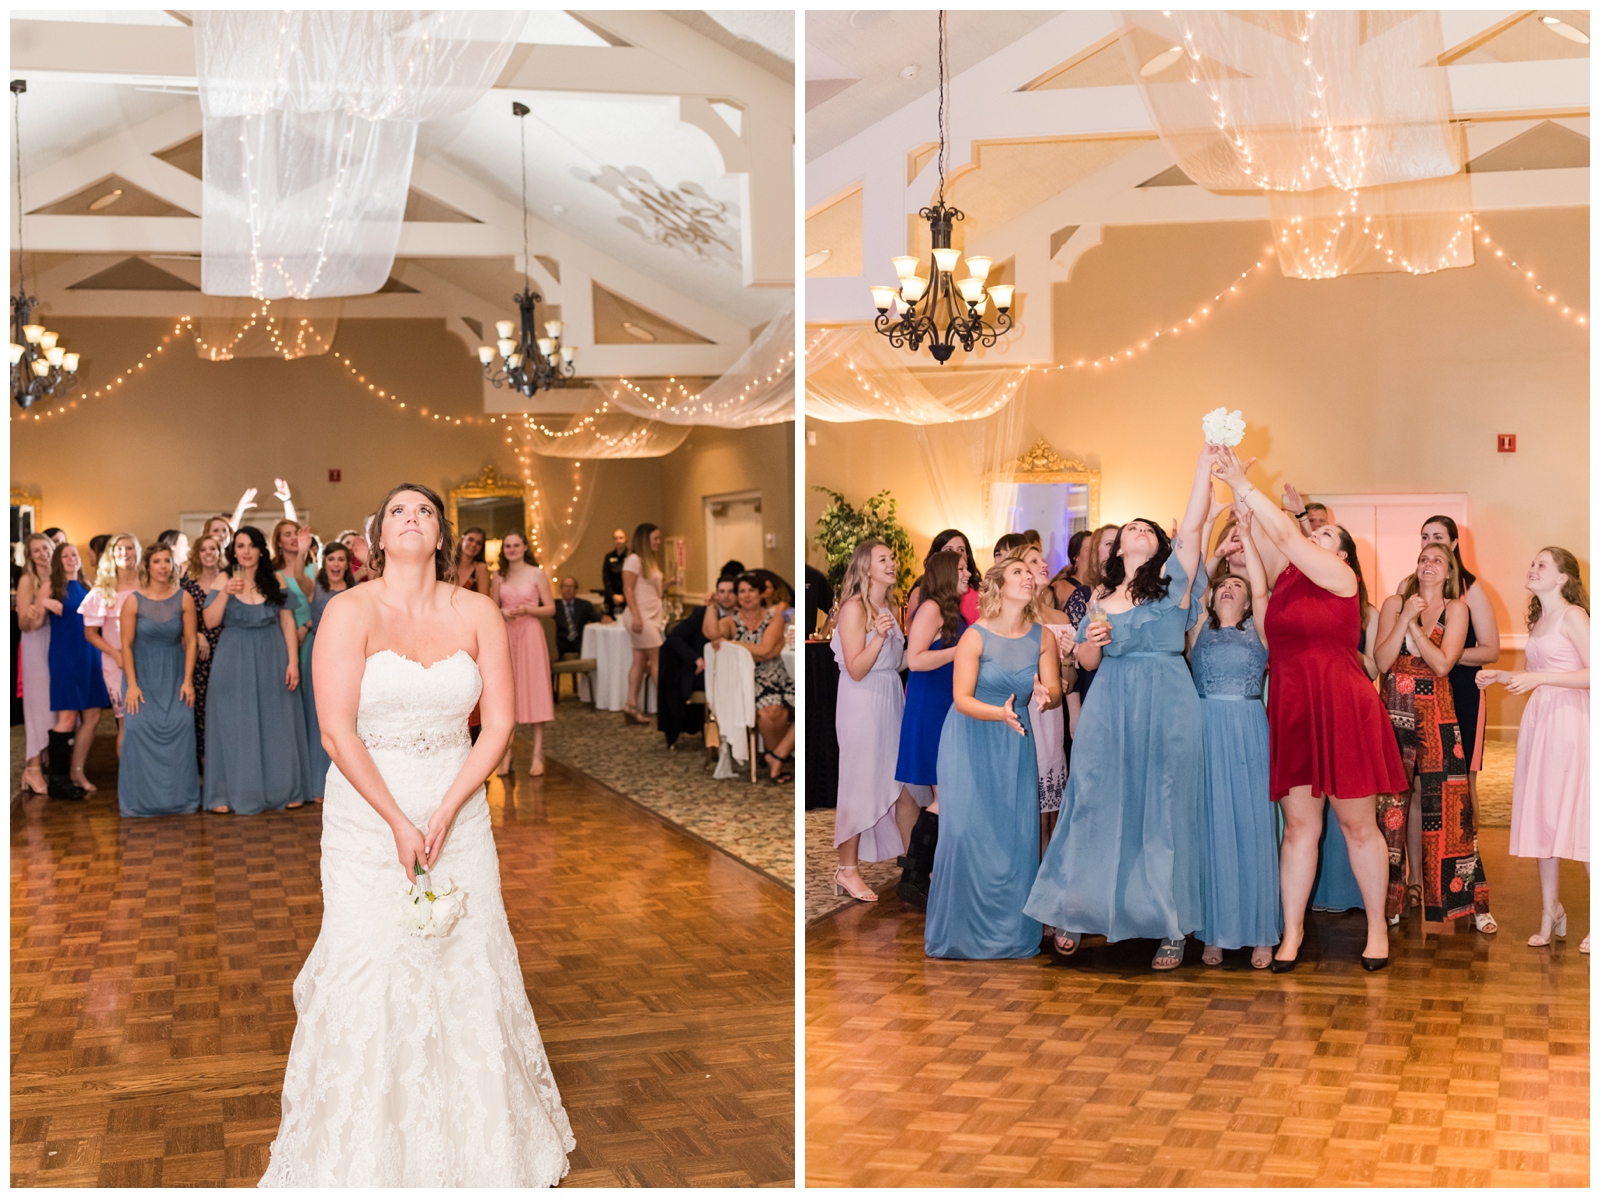 bride tosses small white bouquet to bridesmaids in blue dresses and women at wedding